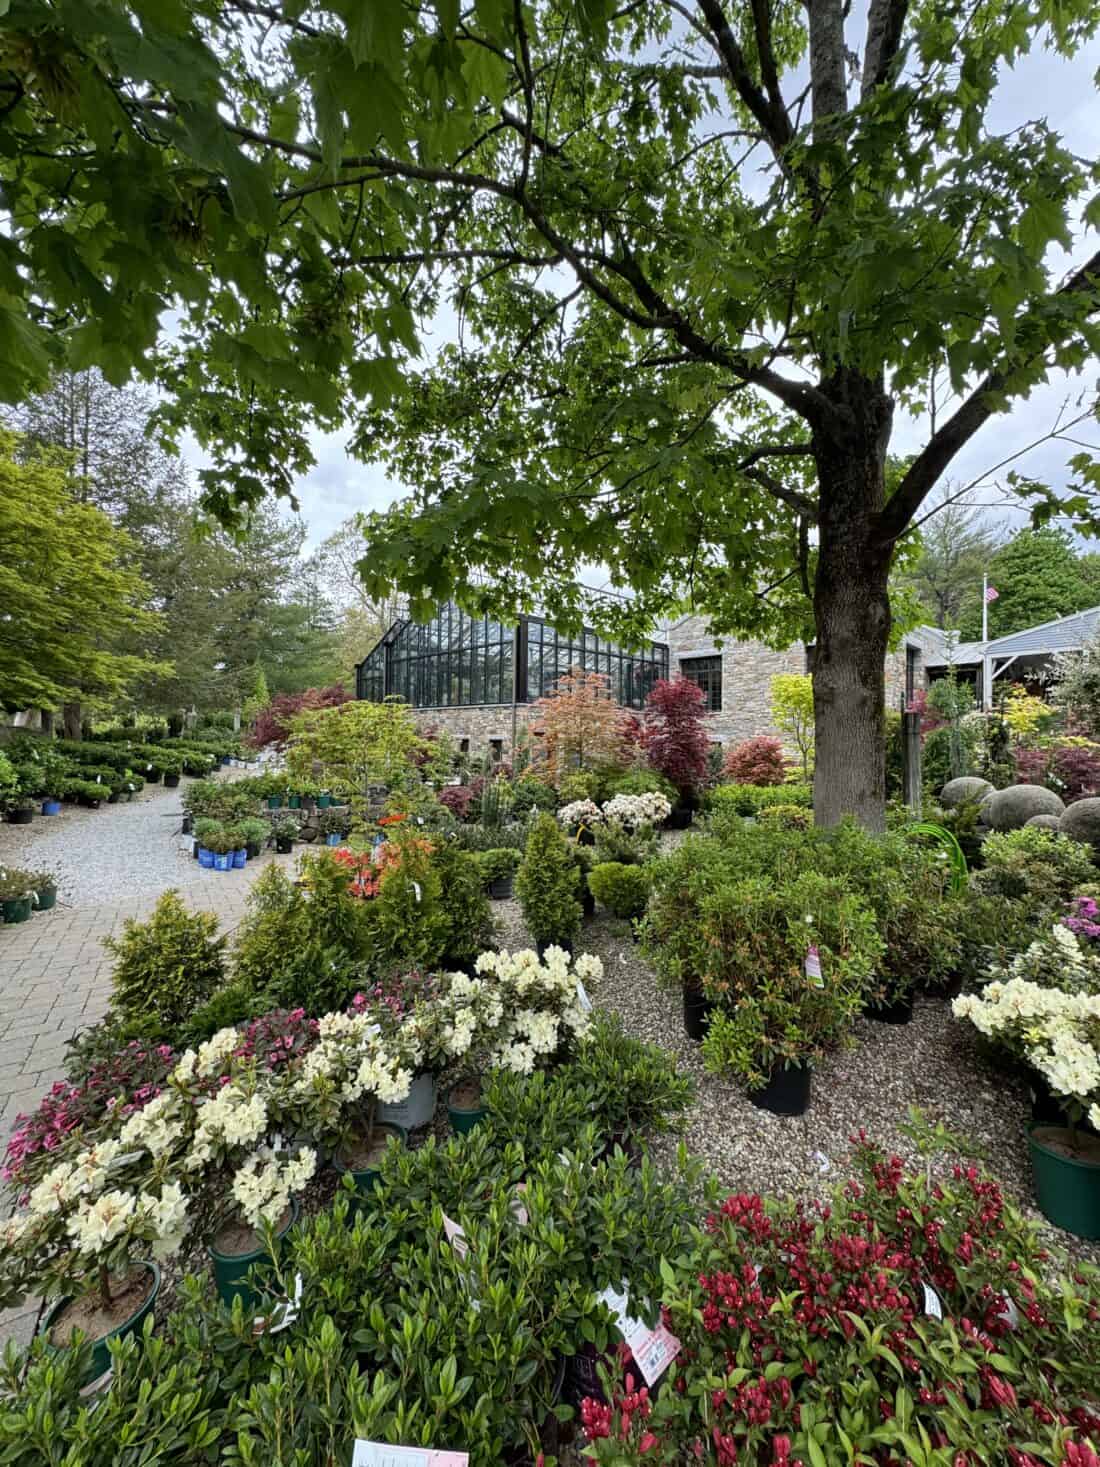 A lush Boston garden center displays a variety of potted plants and flowers, including blooming white and red azaleas. In the background, a greenhouse is partly visible among tall green trees under a cloudy sky. A gravel path winds through the vibrant display.